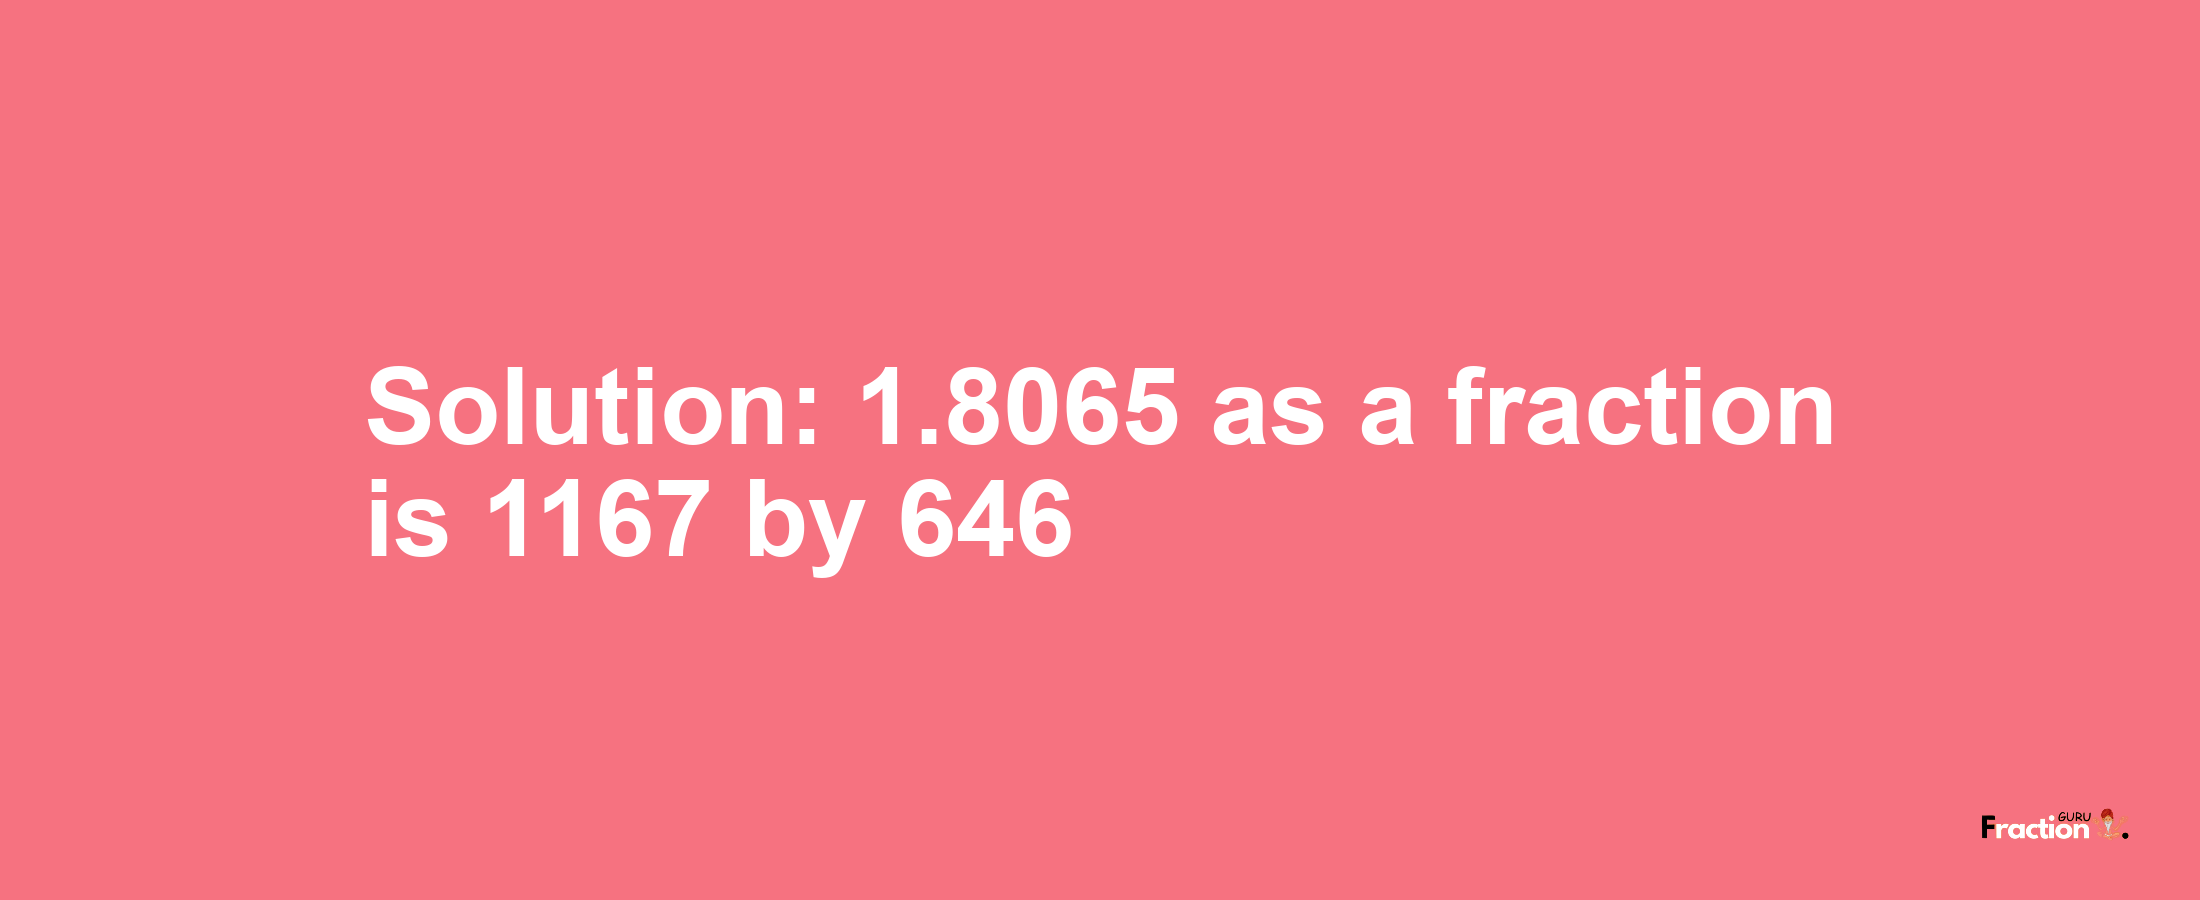 Solution:1.8065 as a fraction is 1167/646